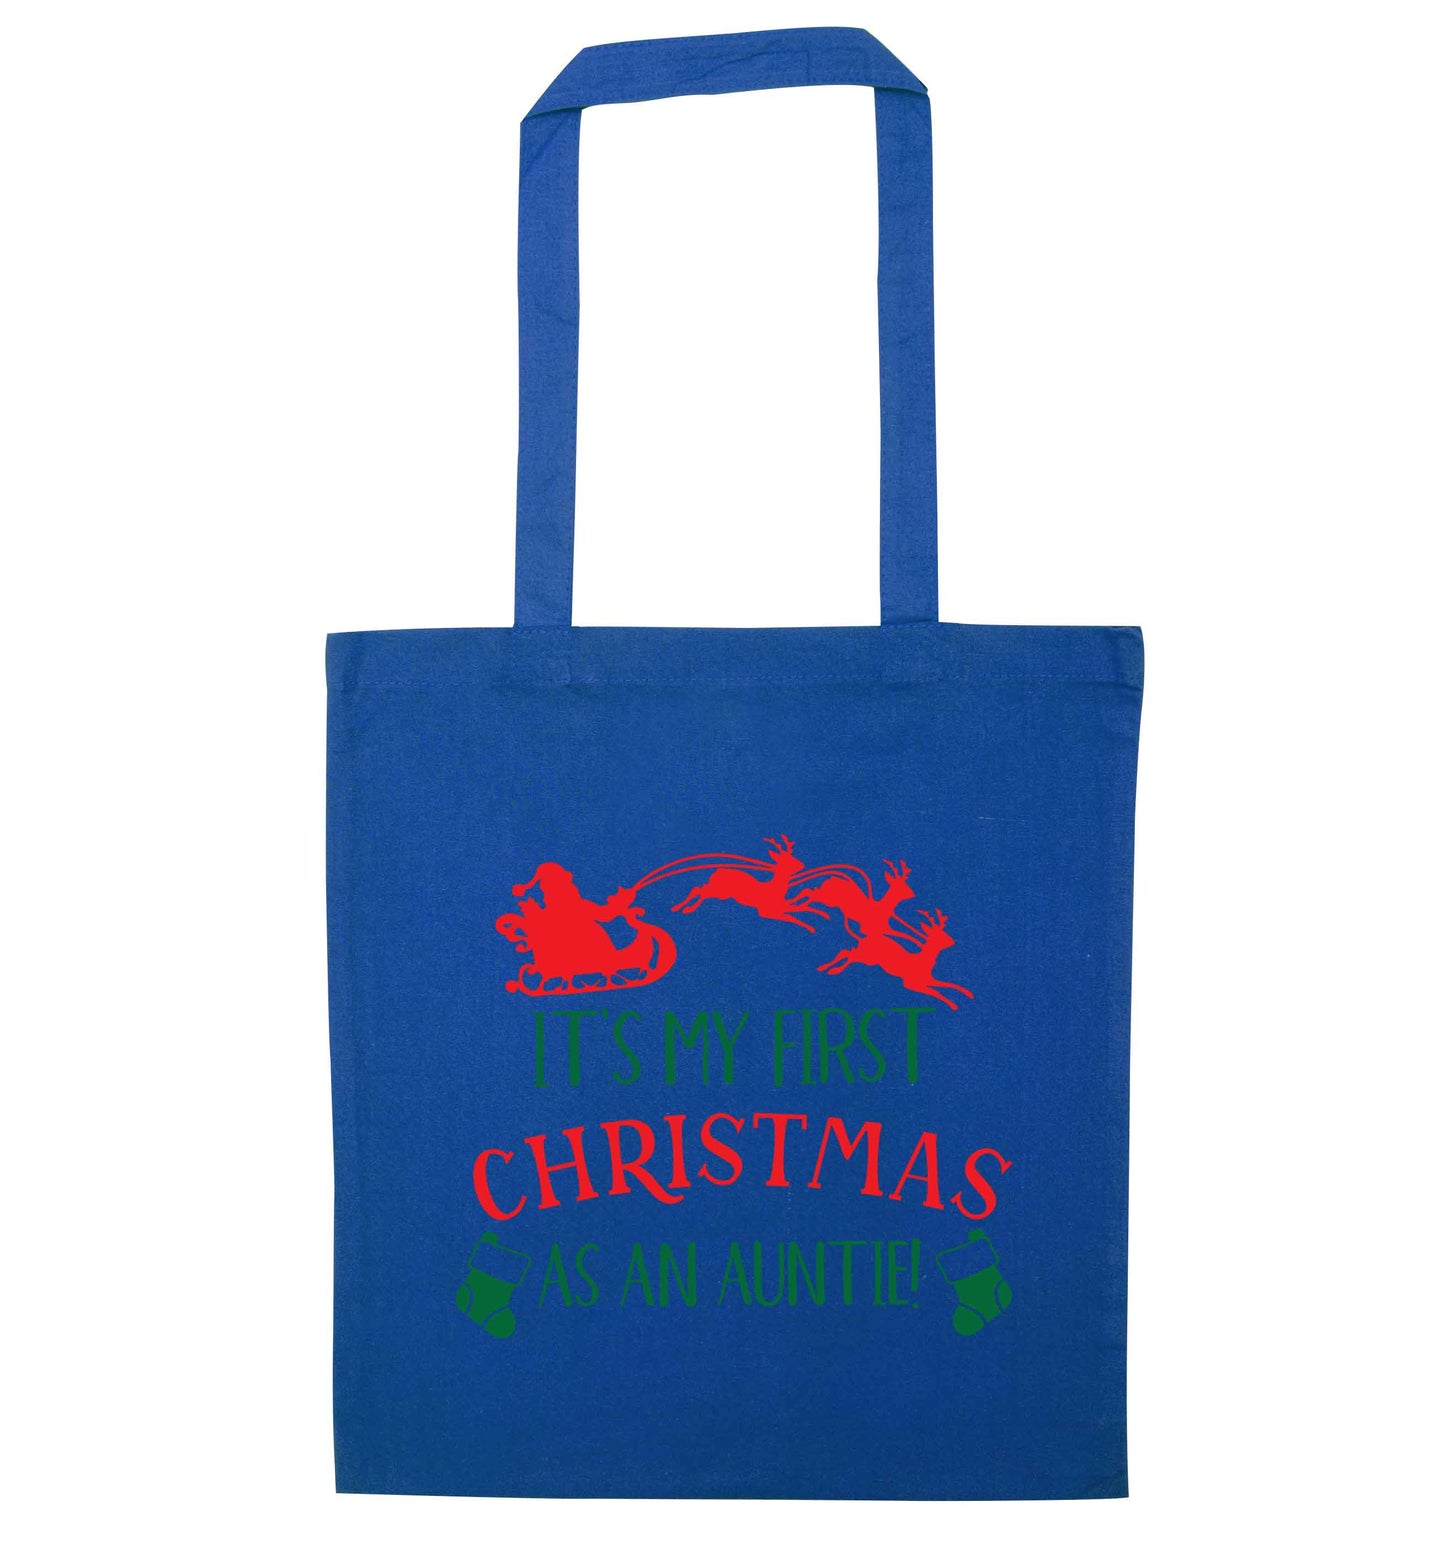 It's my first Christmas as an auntie! blue tote bag